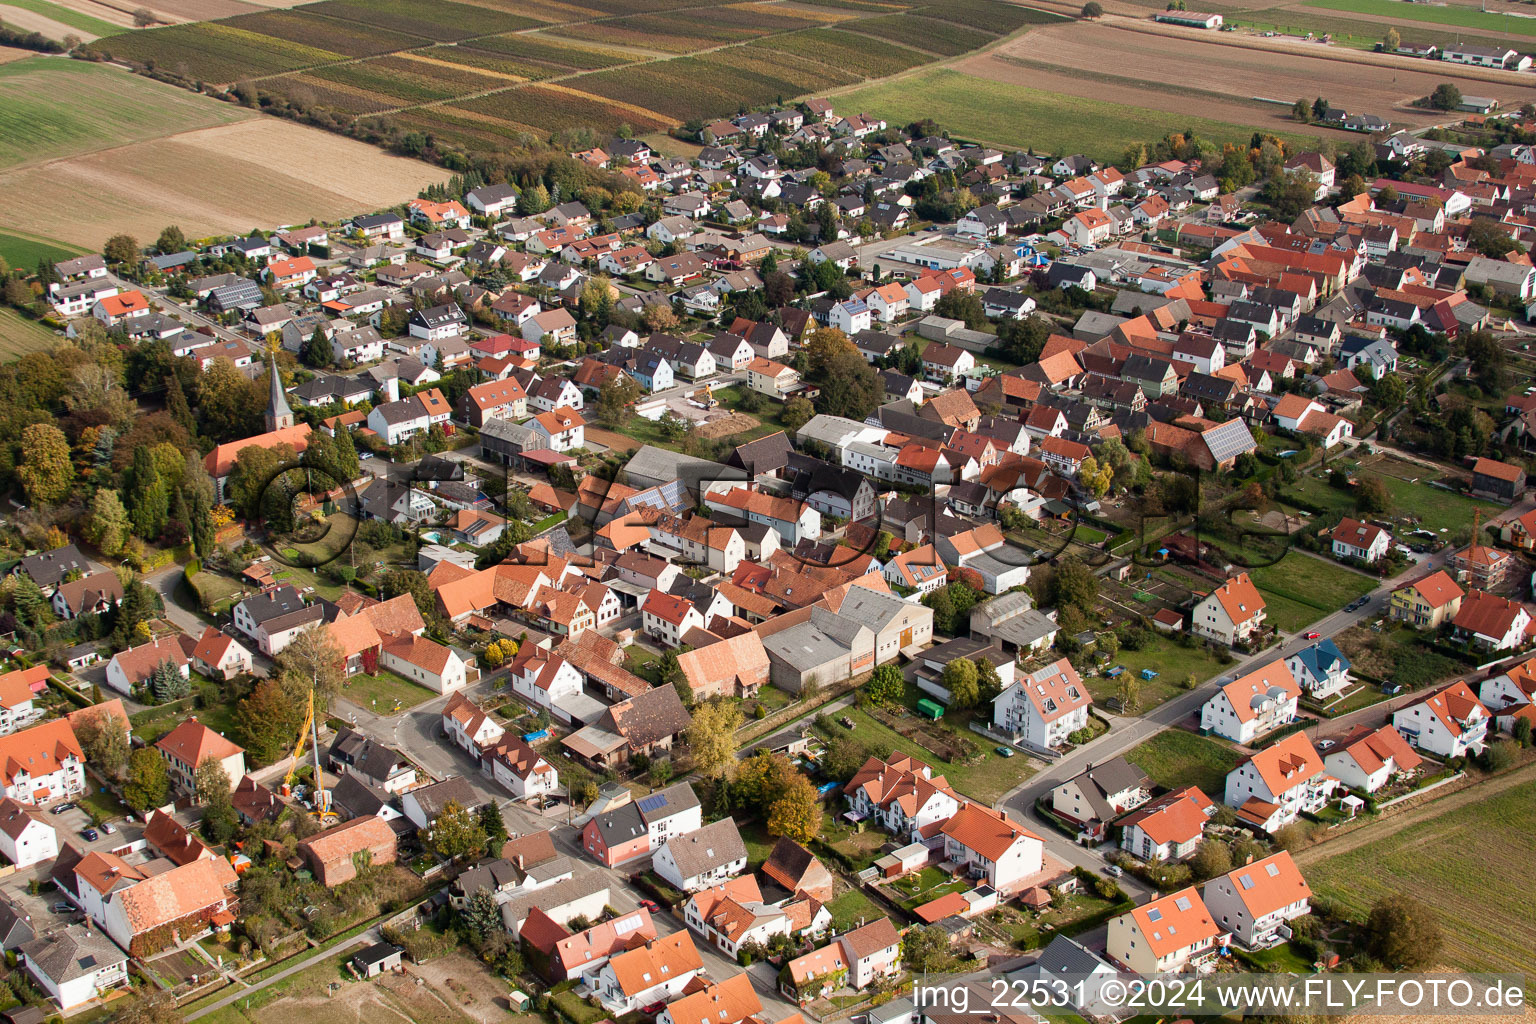 Aerial photograpy of Village - view on the edge of agricultural fields and farmland in Freckenfeld in the state Rhineland-Palatinate